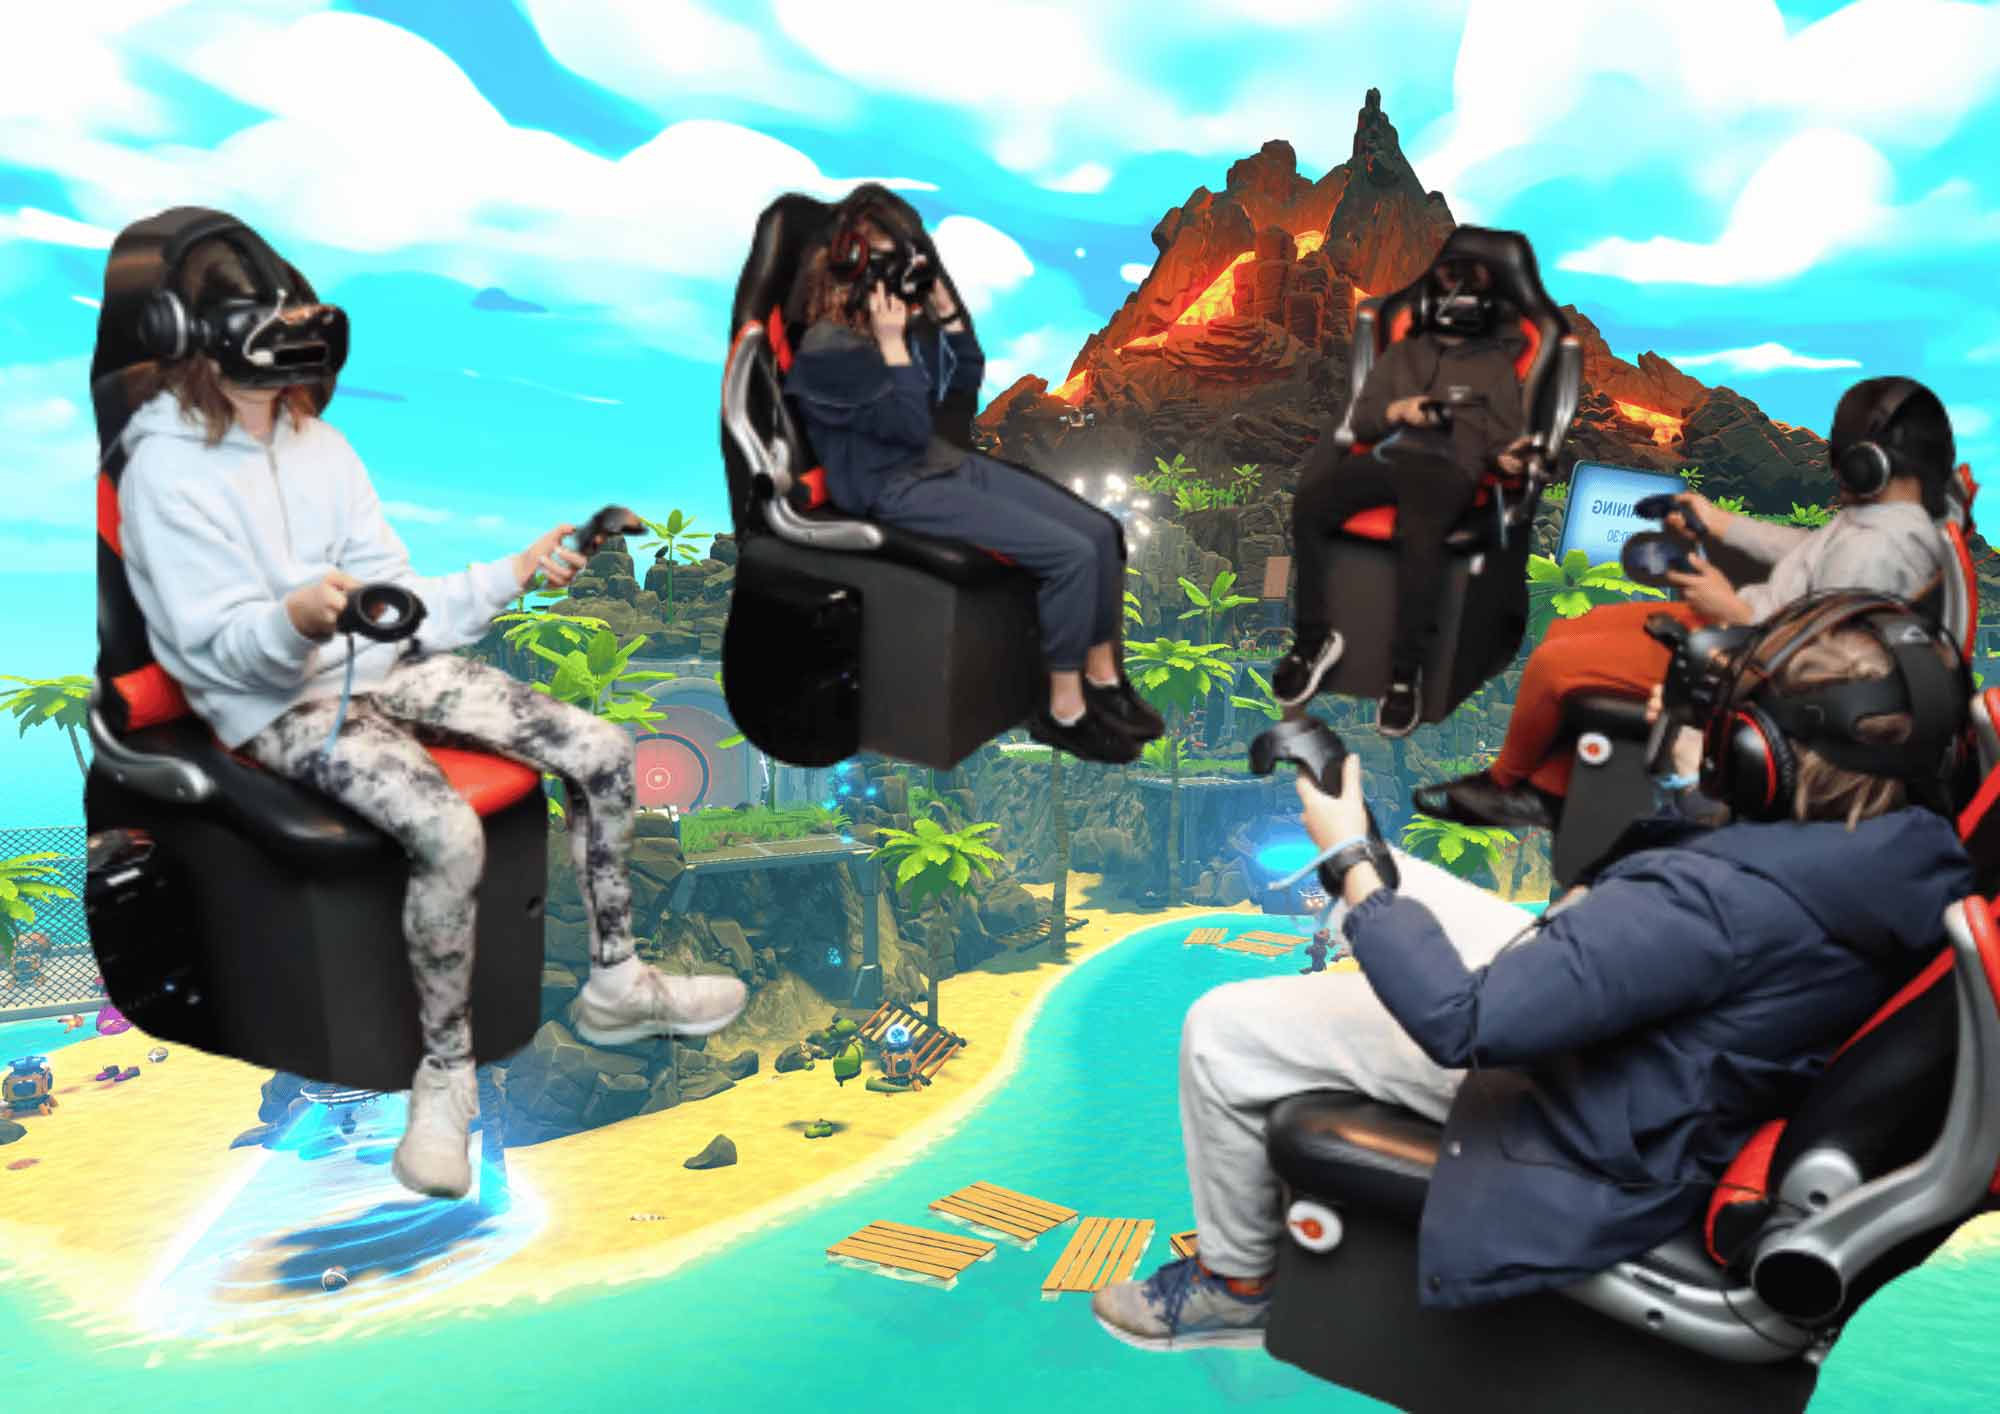 Virtual reality All-against-all matches are an exciting way to get together with friends for some mindless fun.